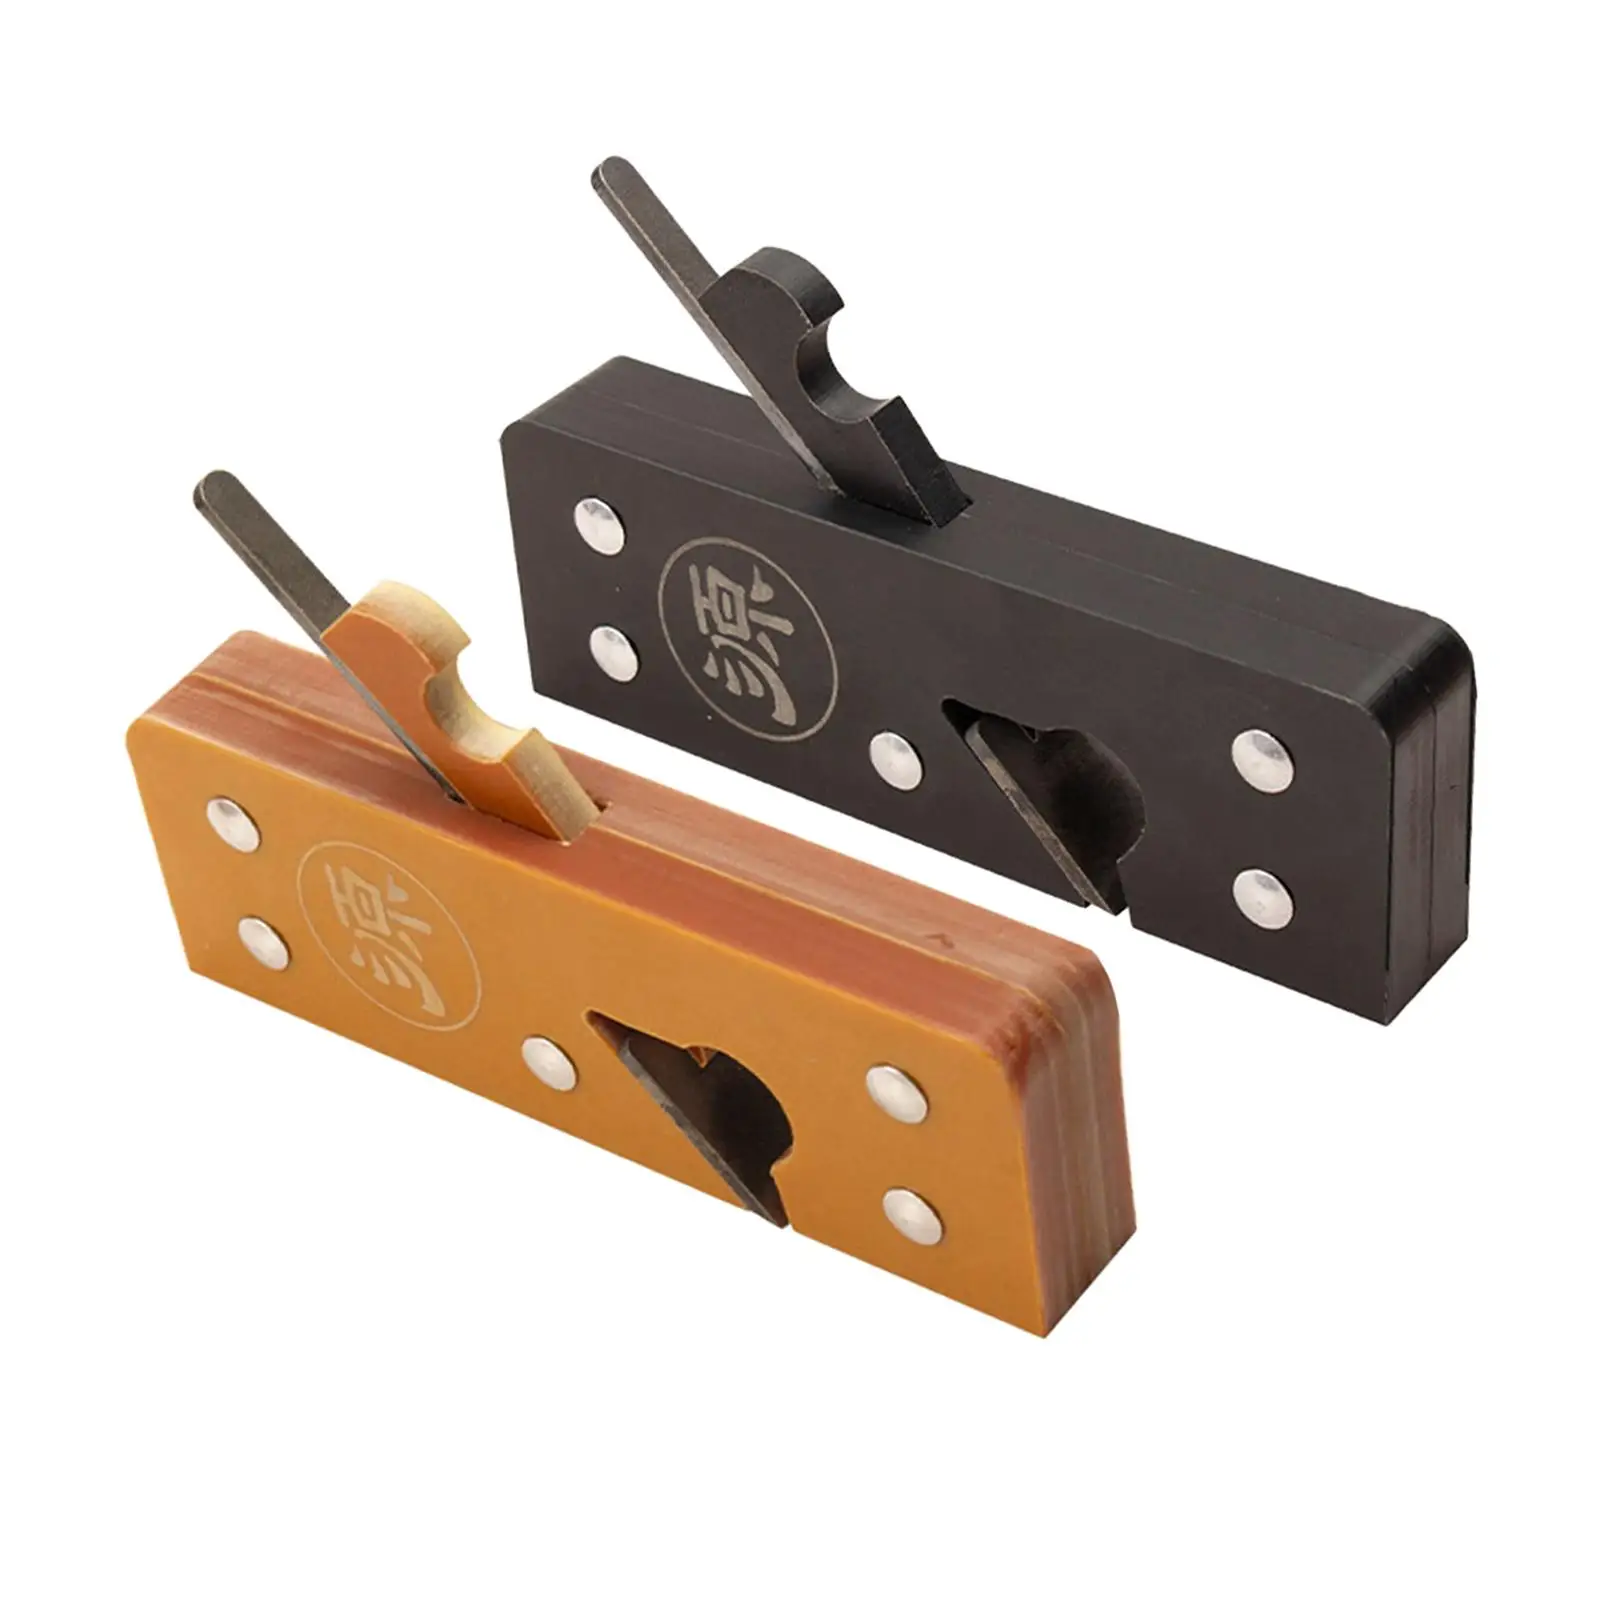 160mm Hand Planer Woodworking Planes Smoothing Plane Portable Hand Plane for Carpenter Polishing Edges